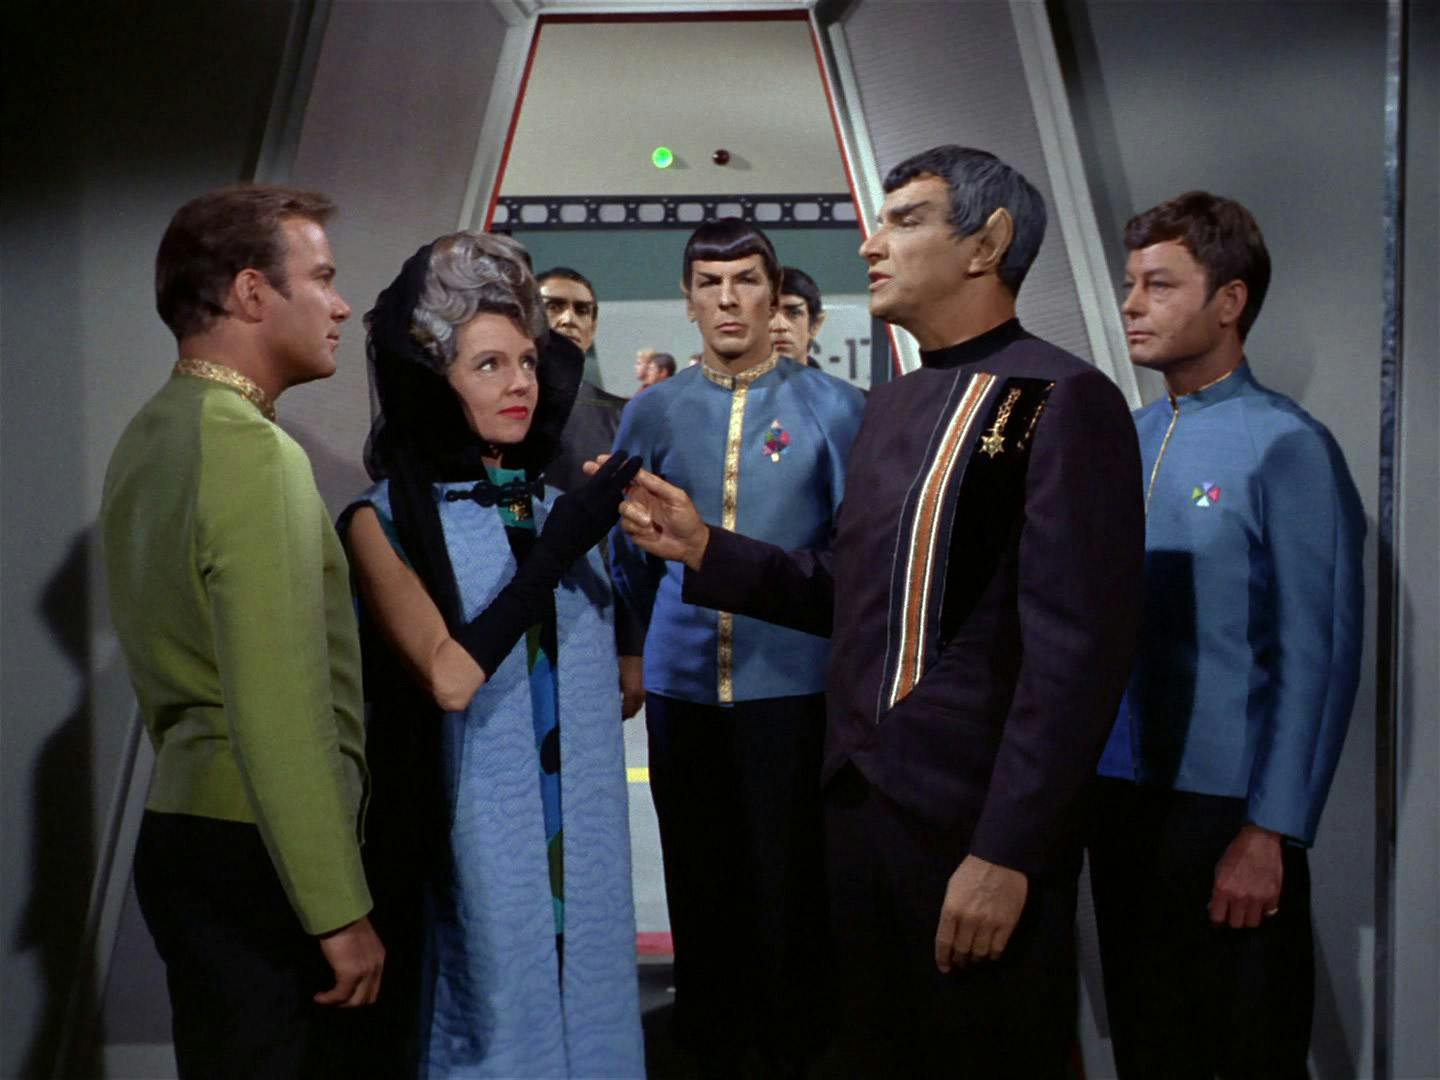 Hosting a conference aboard the Enterprise, Kirk greets the Vulcan ambassadors (and Spock's parents) Amanda Grayson and Sarek as Spock and McCoy stand by in 'Journey to Babel'